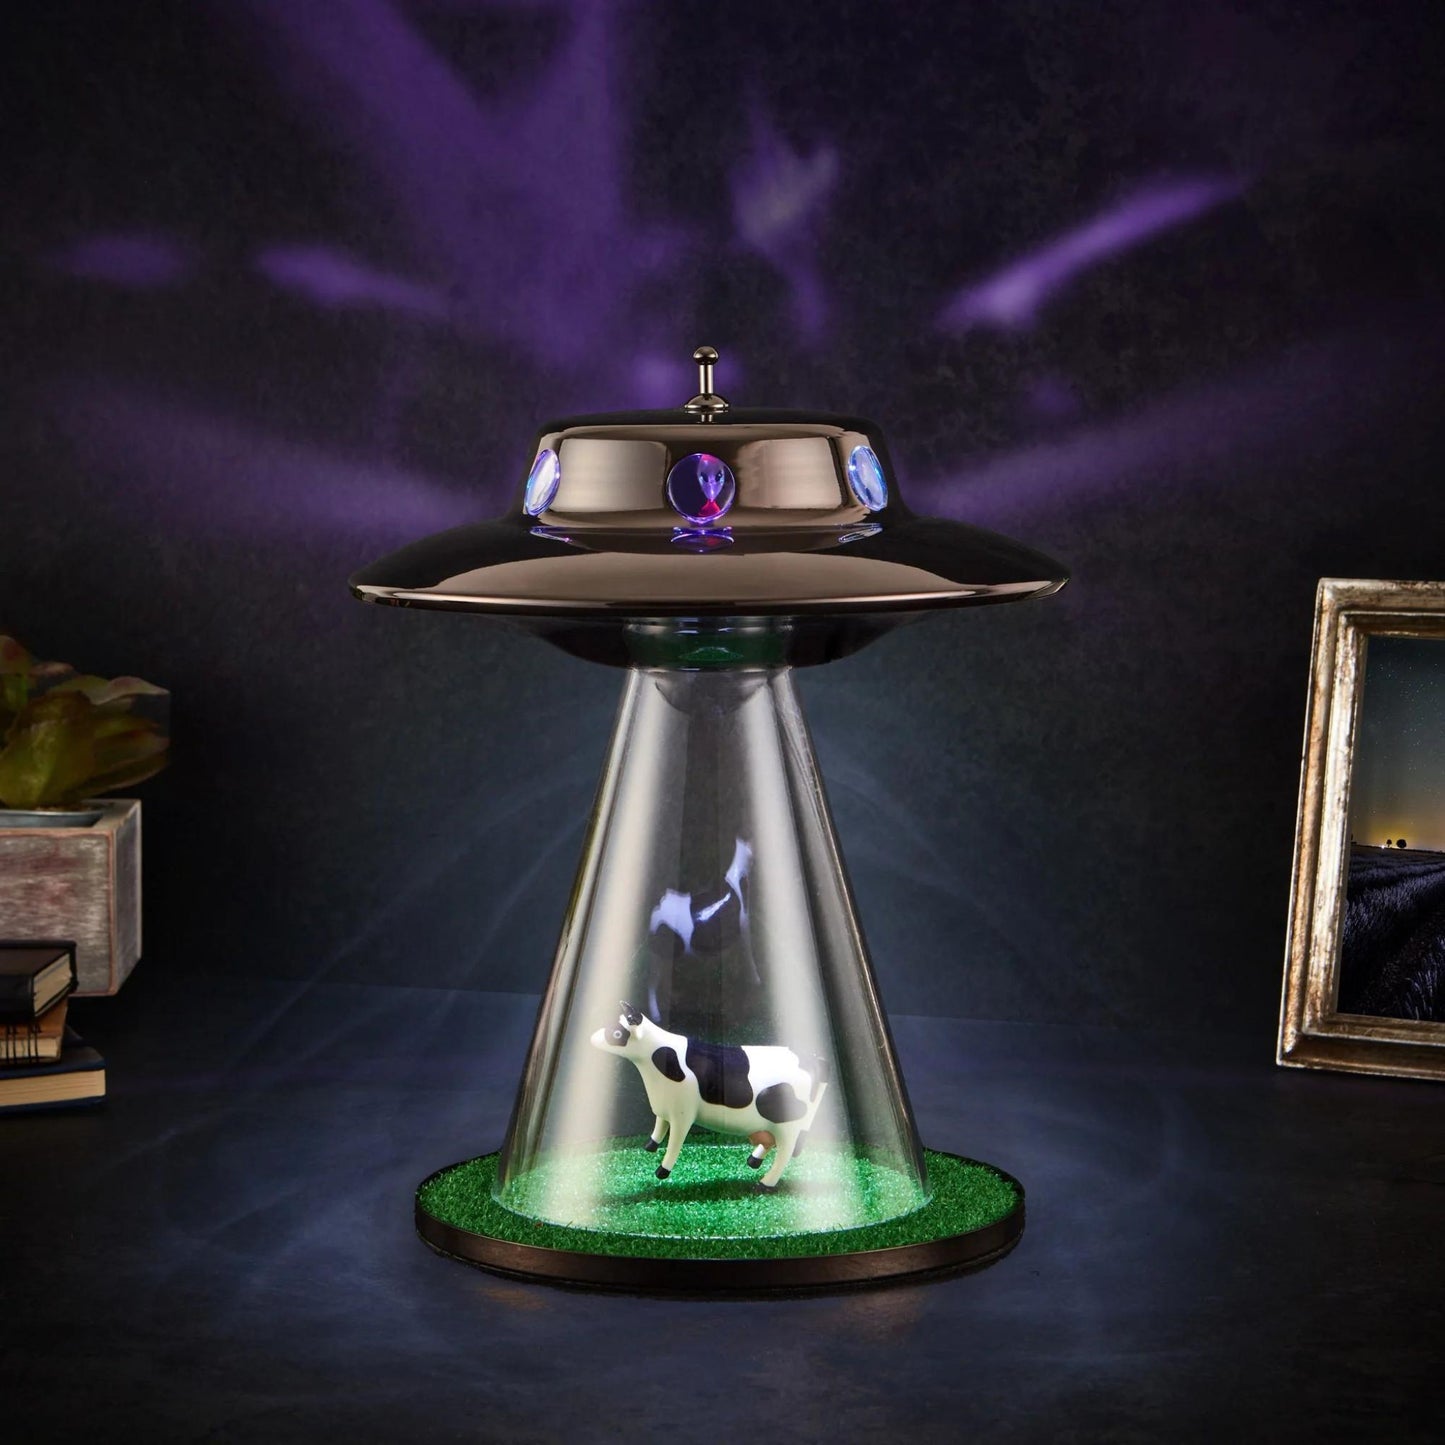 Red LED - Original UFO Cow Lamp & amazon alien abduction table desk lamp with grass, cow and flying UFO saucer LED RGB night light